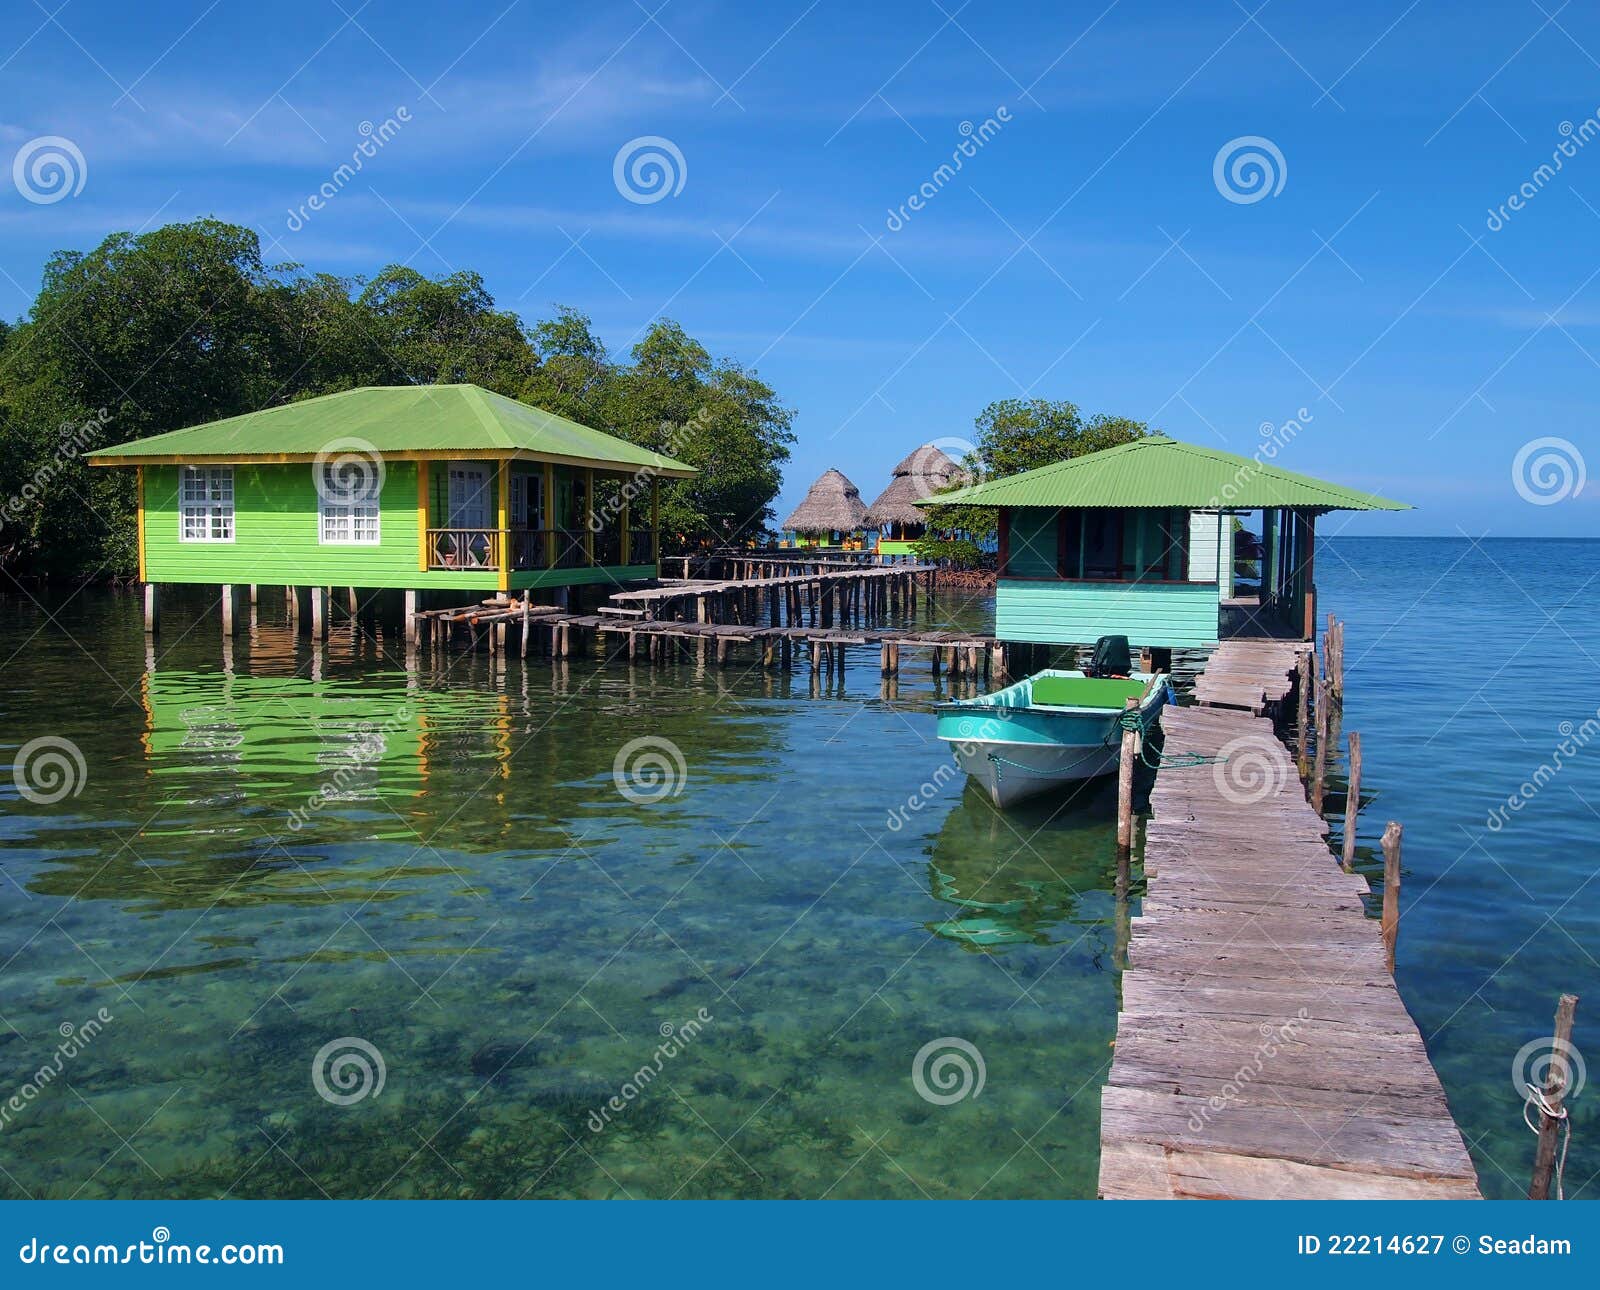 Cabins over the sea stock image. Image of paradise ...